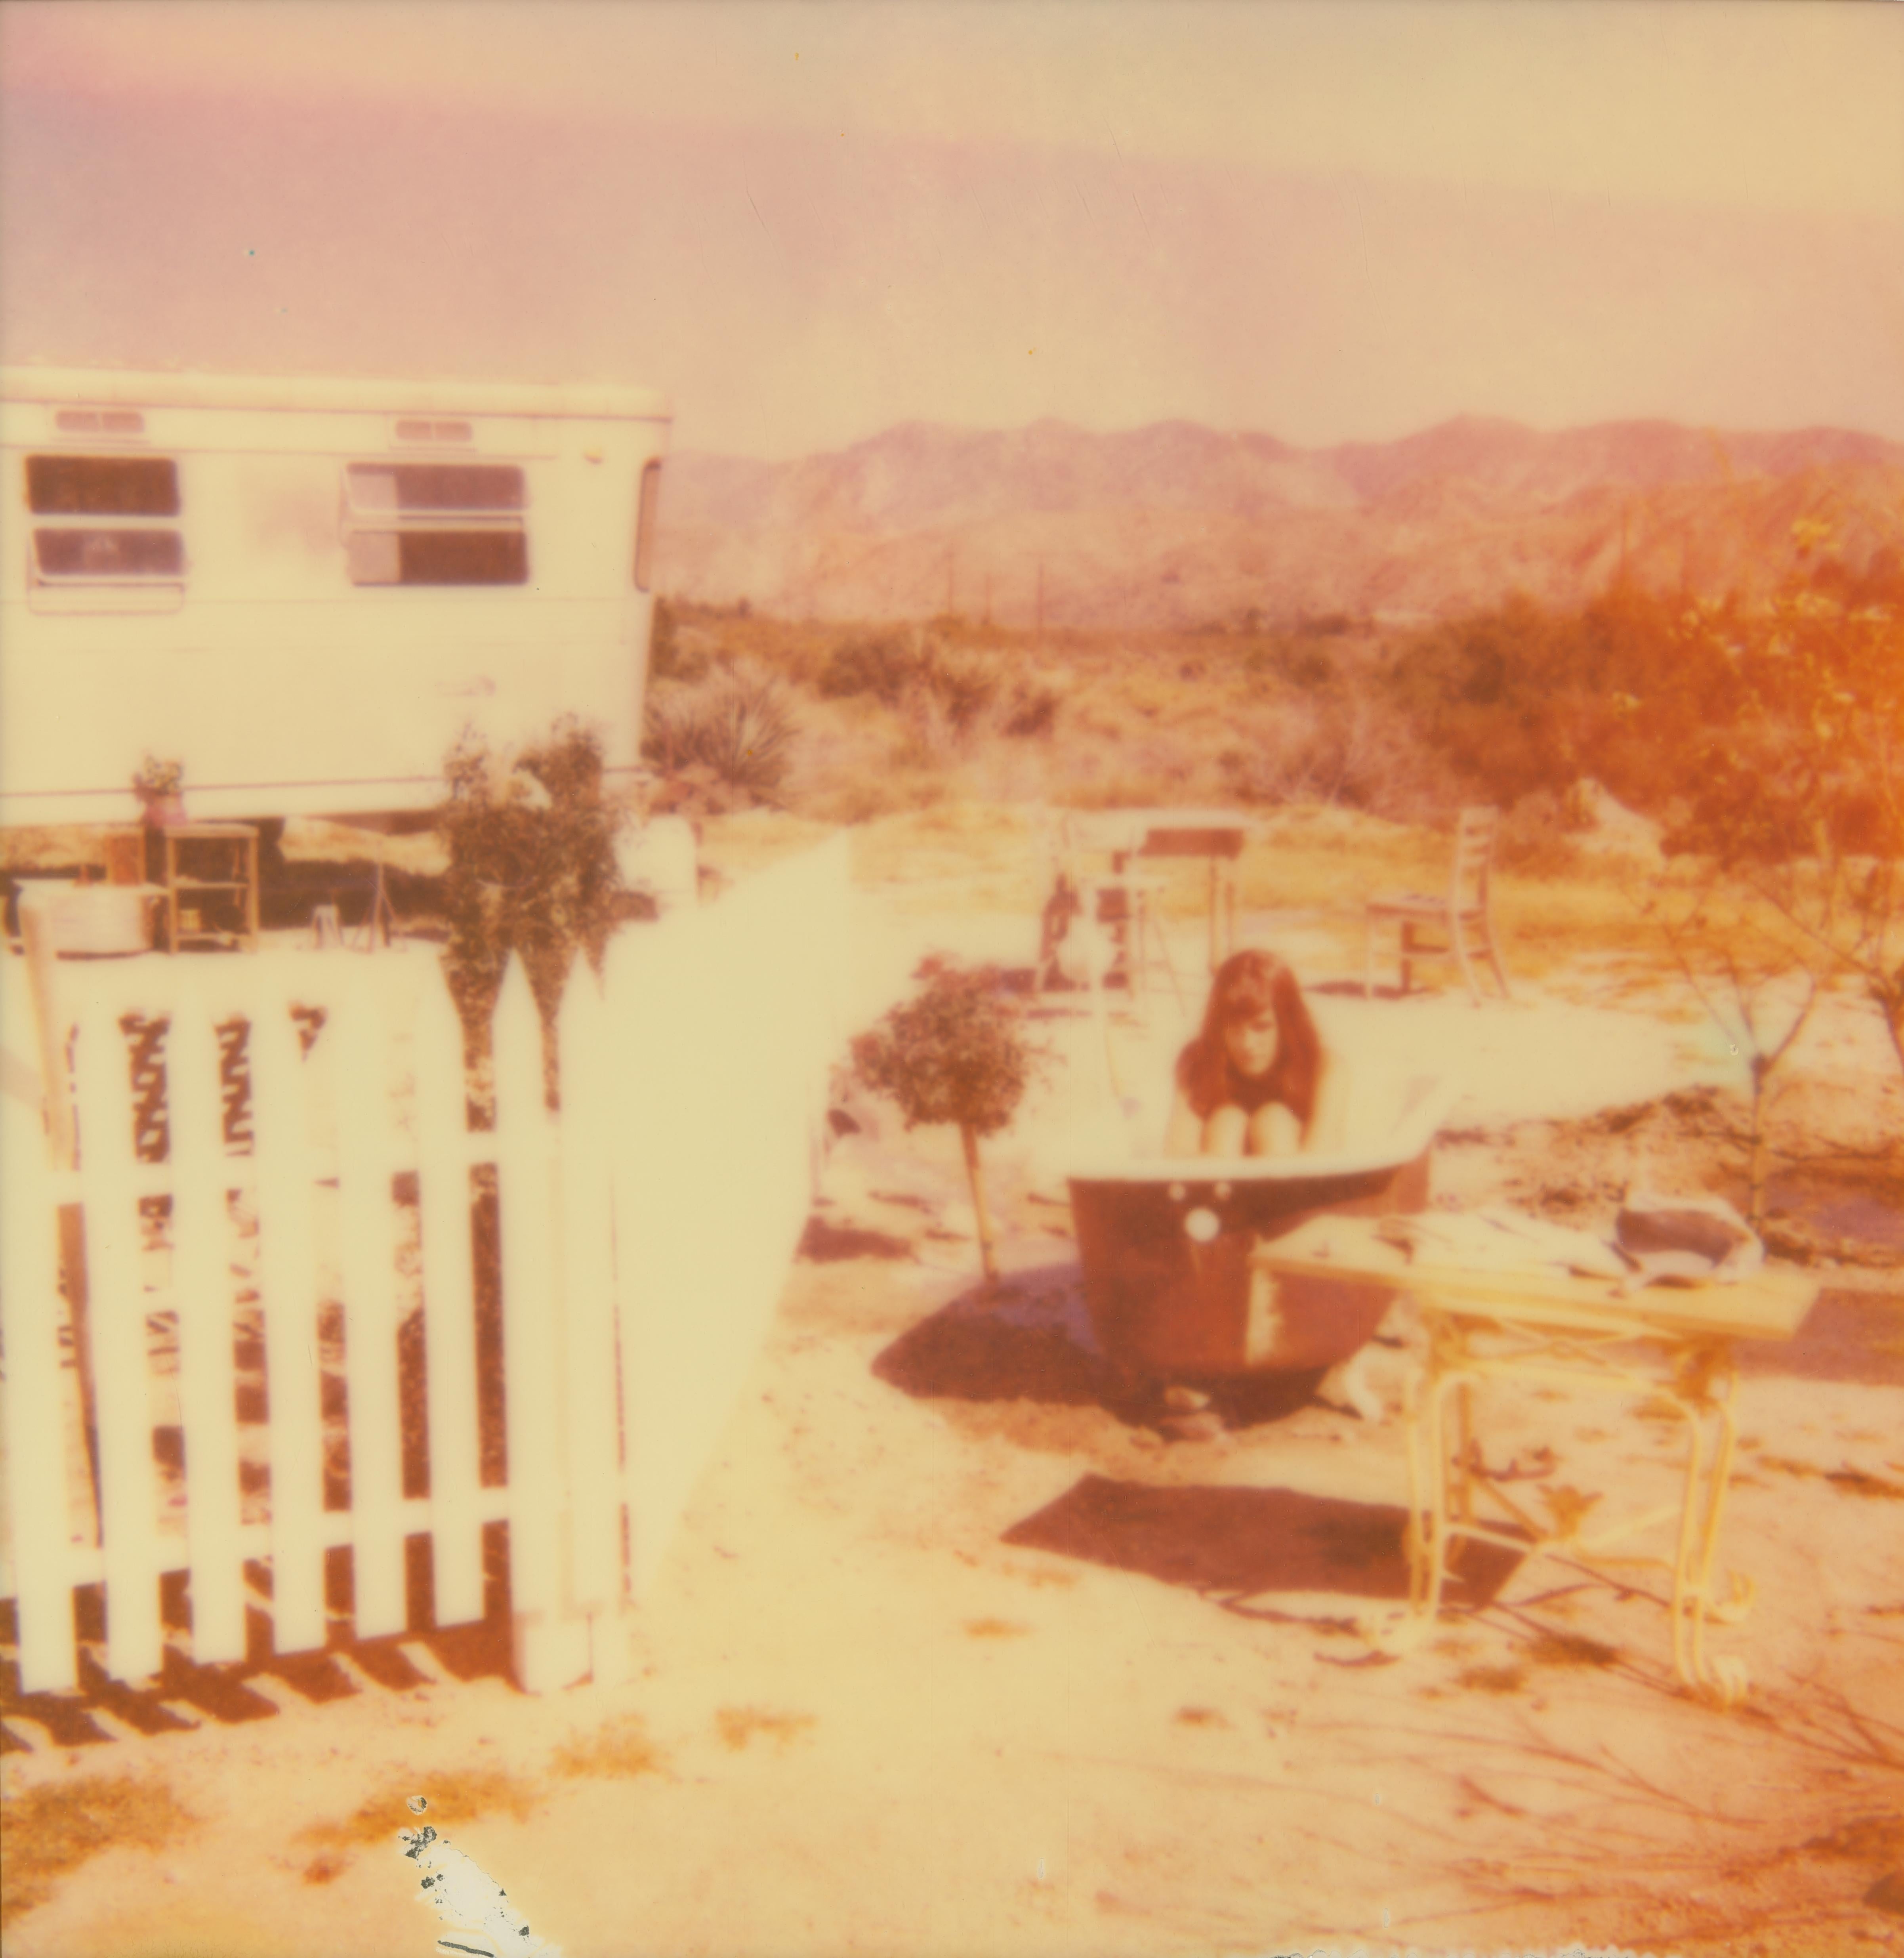 Stefanie Schneider Figurative Photograph - The Girl I (The Girl behind the White Picket Fence) - Contemporary, Polaroid